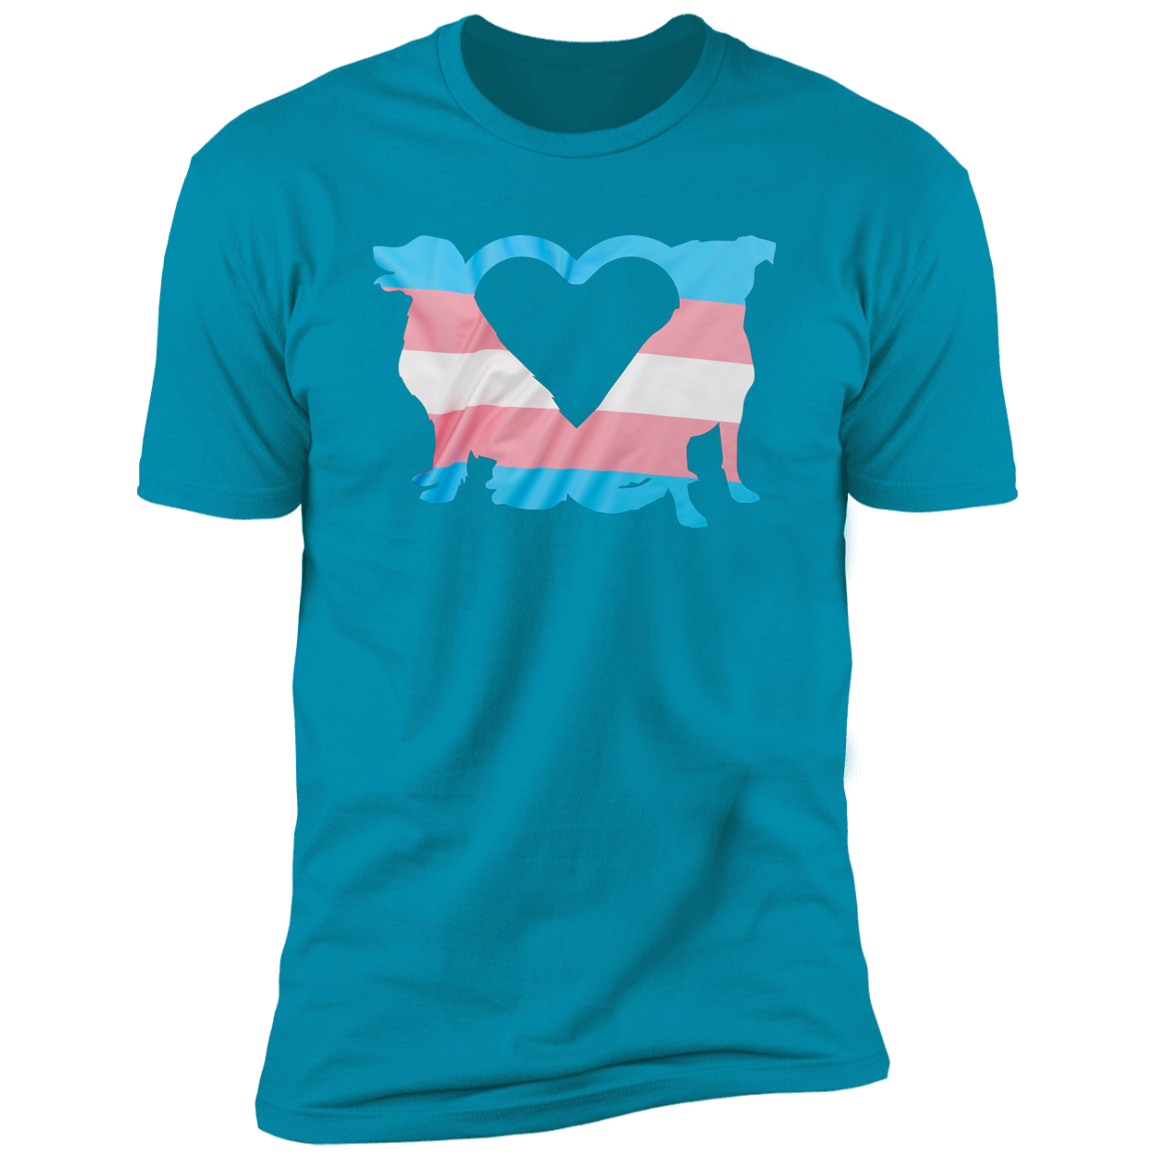 Trans Pride Dogs Heart Pride T-shirt, Trans Pride Dog Shirt for humans, in turquoise